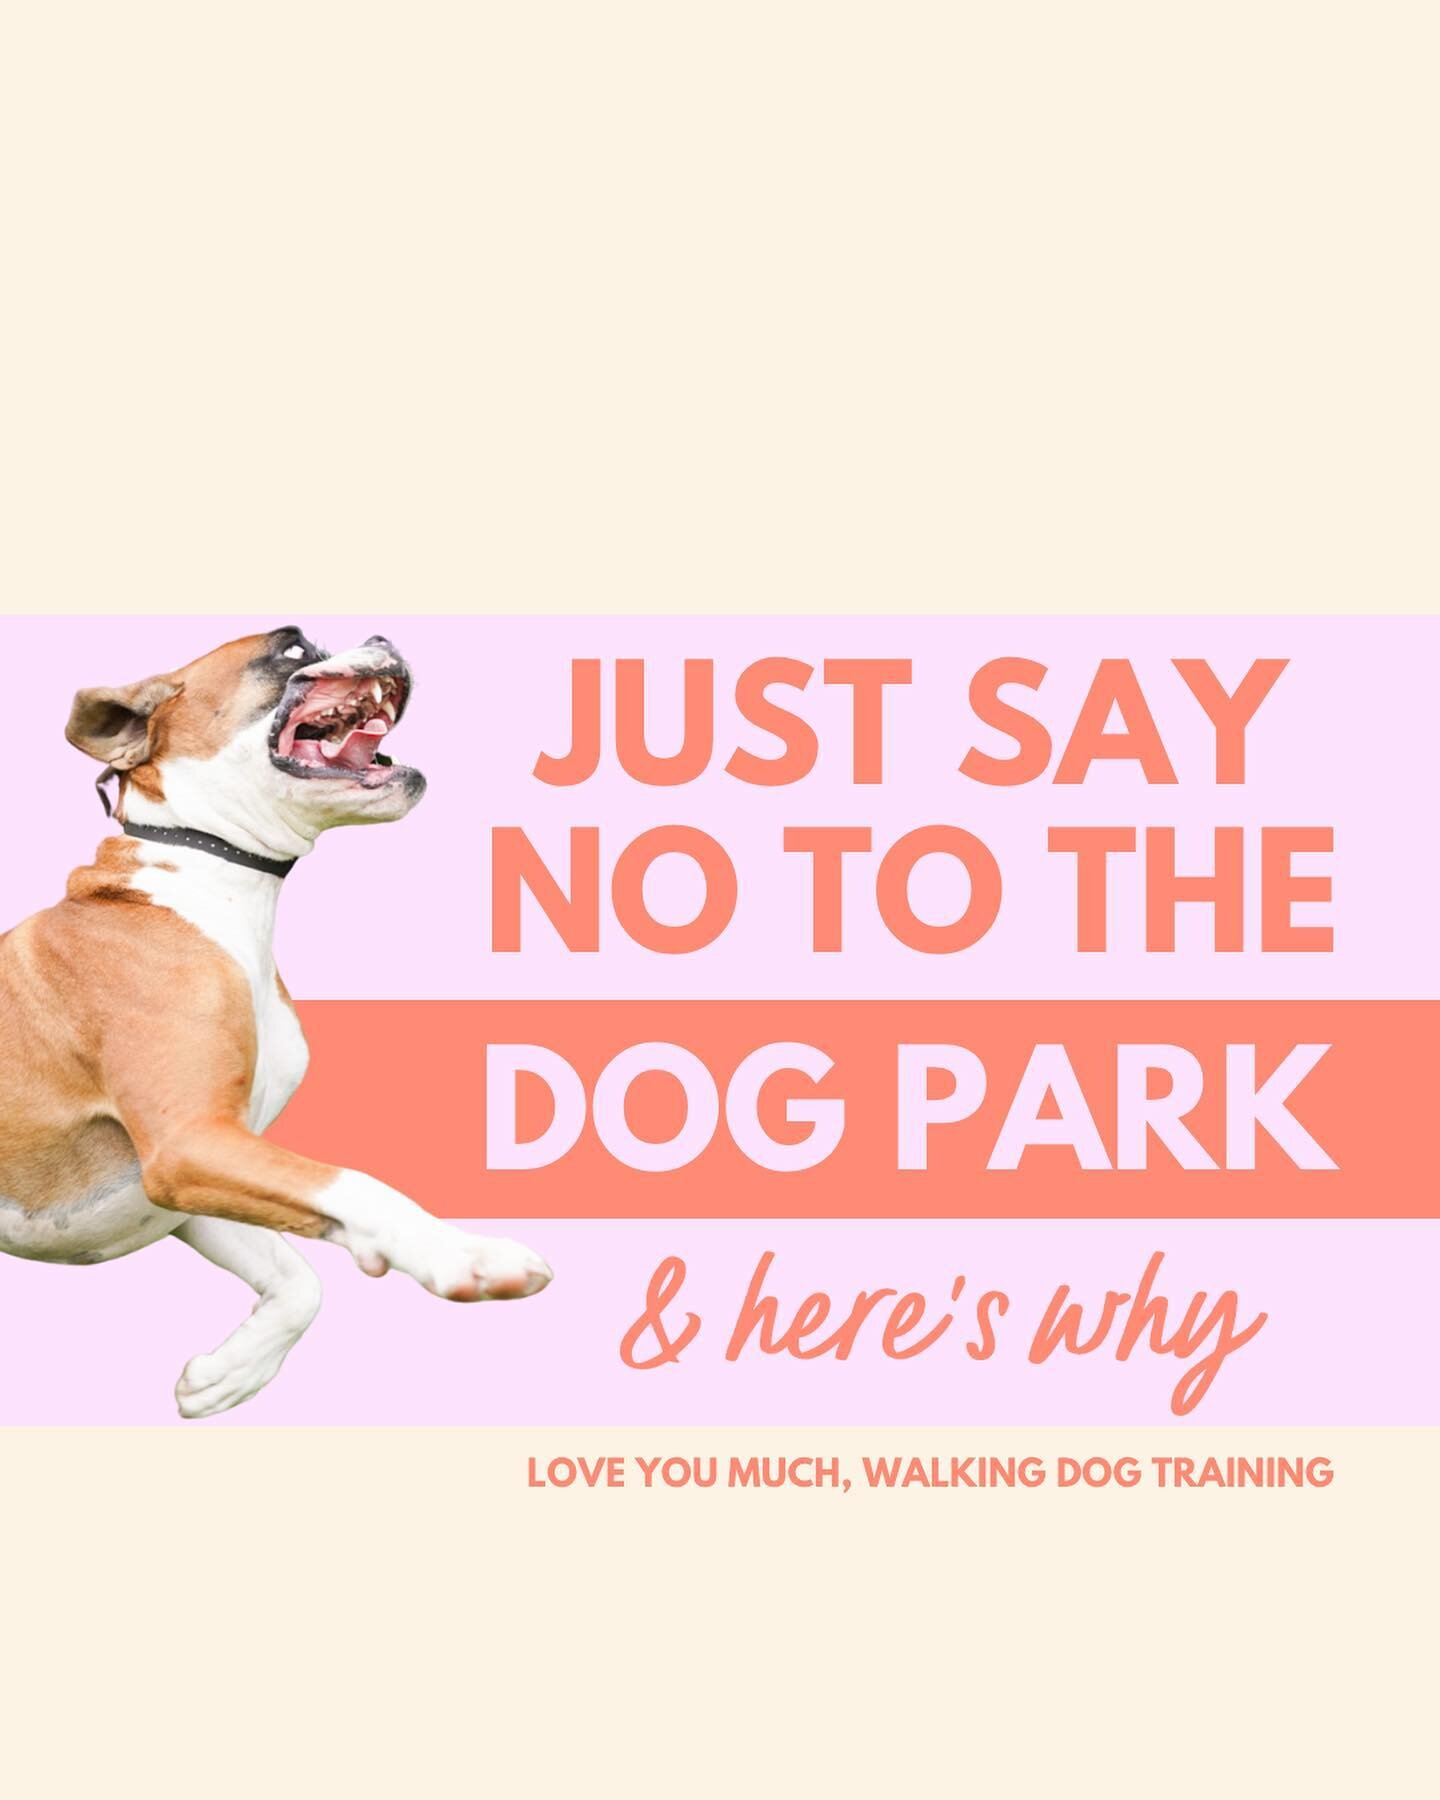 I hear it so often.
.
My dog is great at the dog park, but terrible on leash.
.
Or an owner wishes her dog cared more about her than random dogs on the walk.
.
And so many of these owners (maybe yourself included - no judgement) also take their dogs 